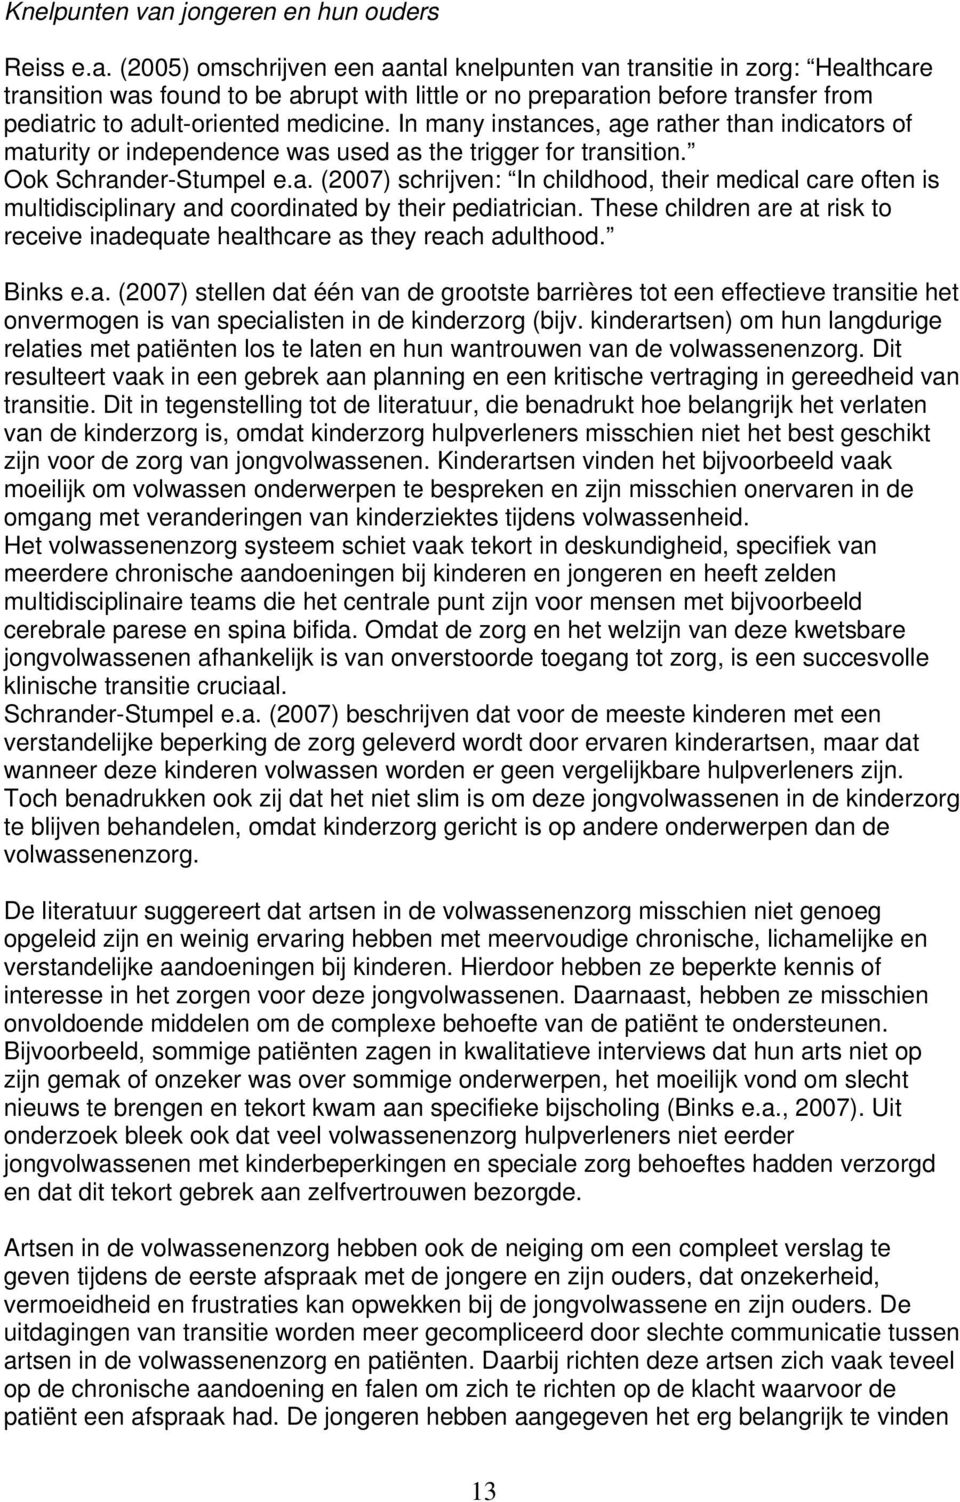 (2005) omschrijven een aantal knelpunten van transitie in zorg: Healthcare transition was found to be abrupt with little or no preparation before transfer from pediatric to adult-oriented medicine.